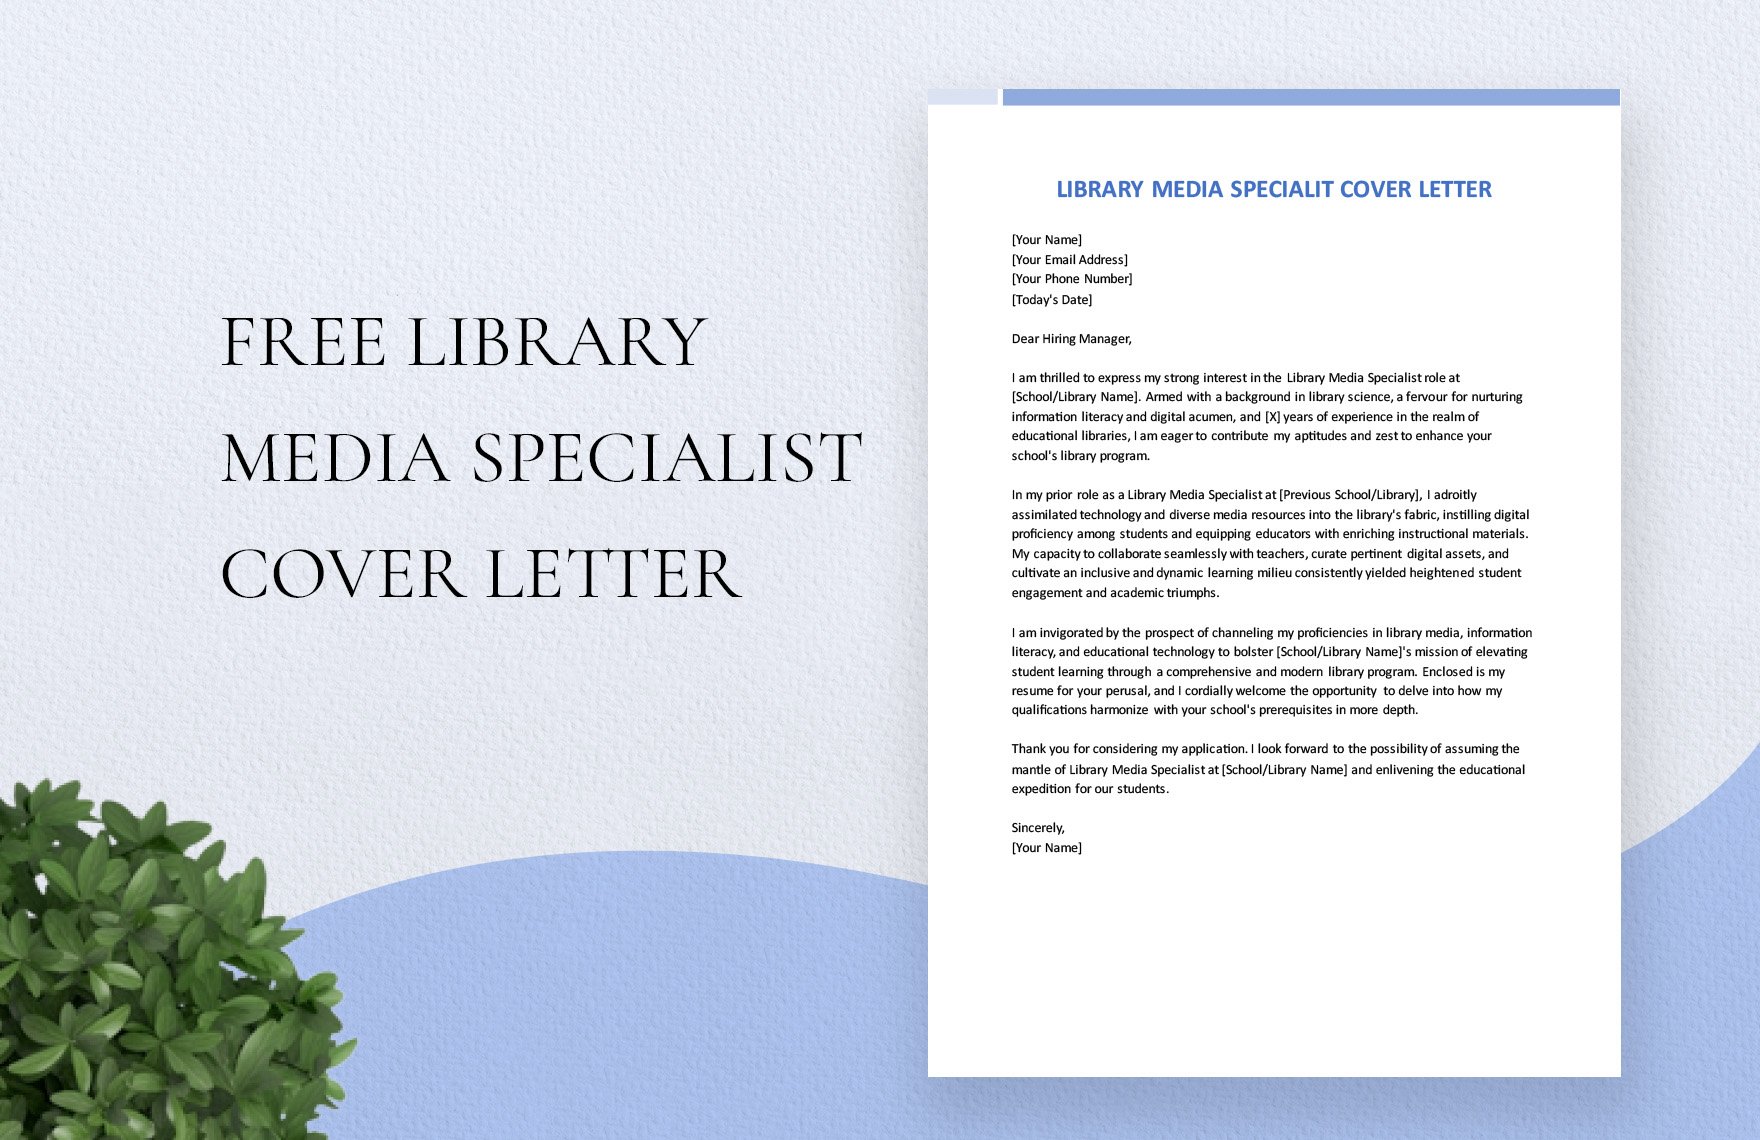 Free Library Media Specialist Cover Letter